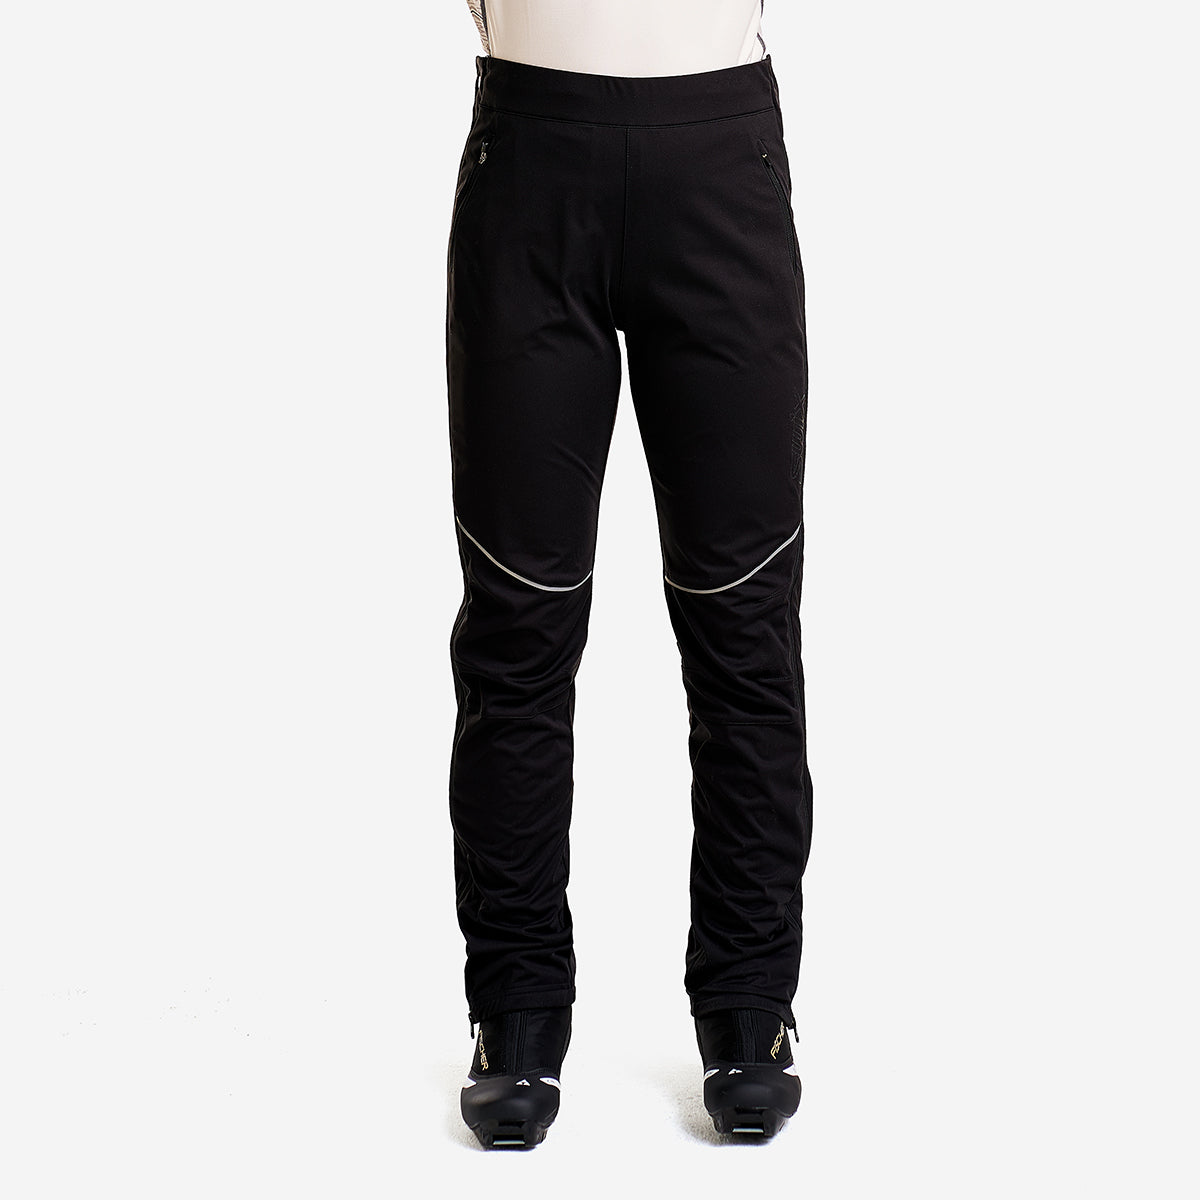 Where Is The Best Place To Buy Sweatpants? – solowomen